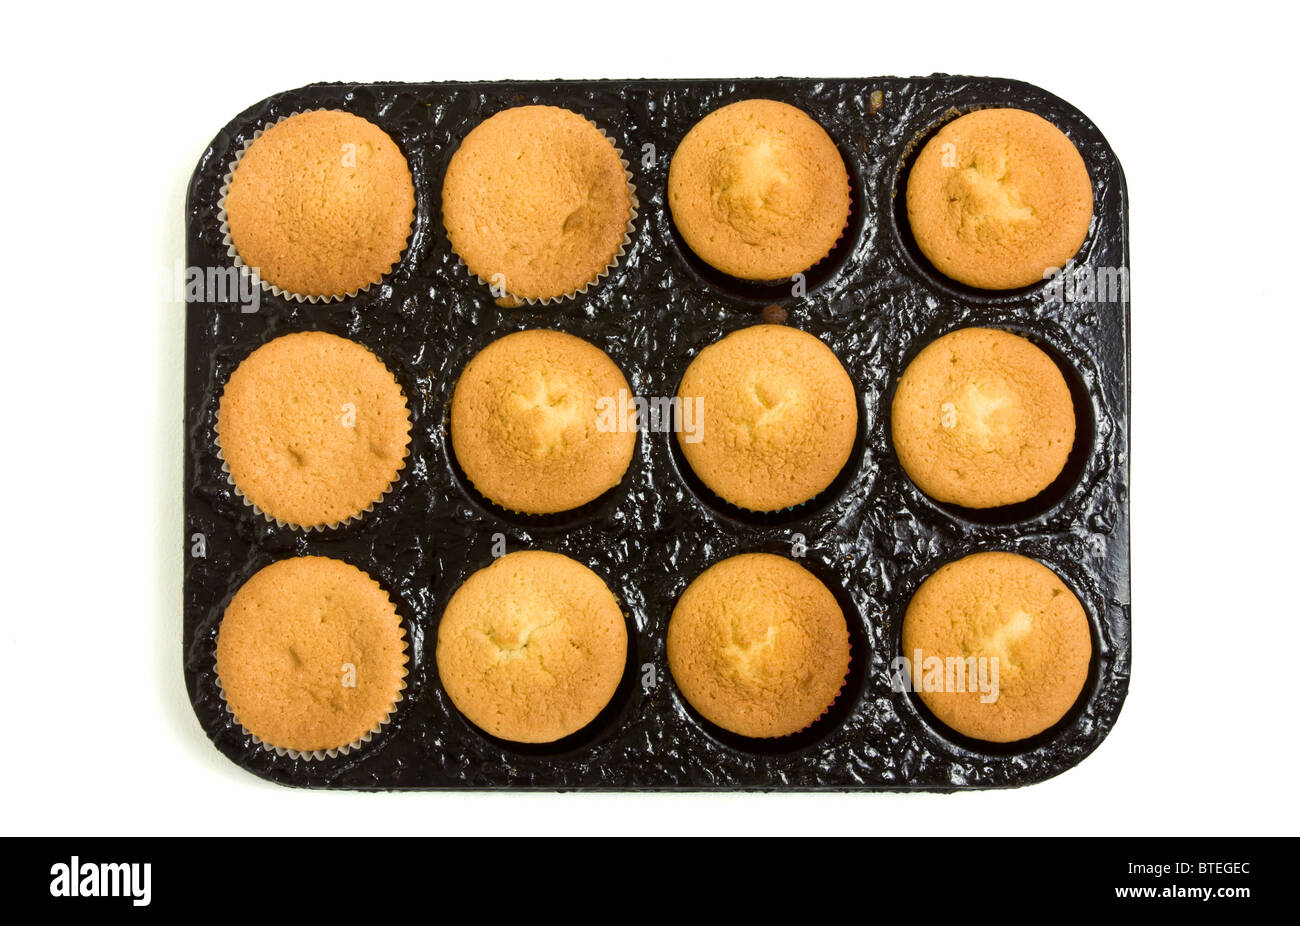 Freshly cooked cup cakes still in baking tray straight from the oven on white. Stock Photo